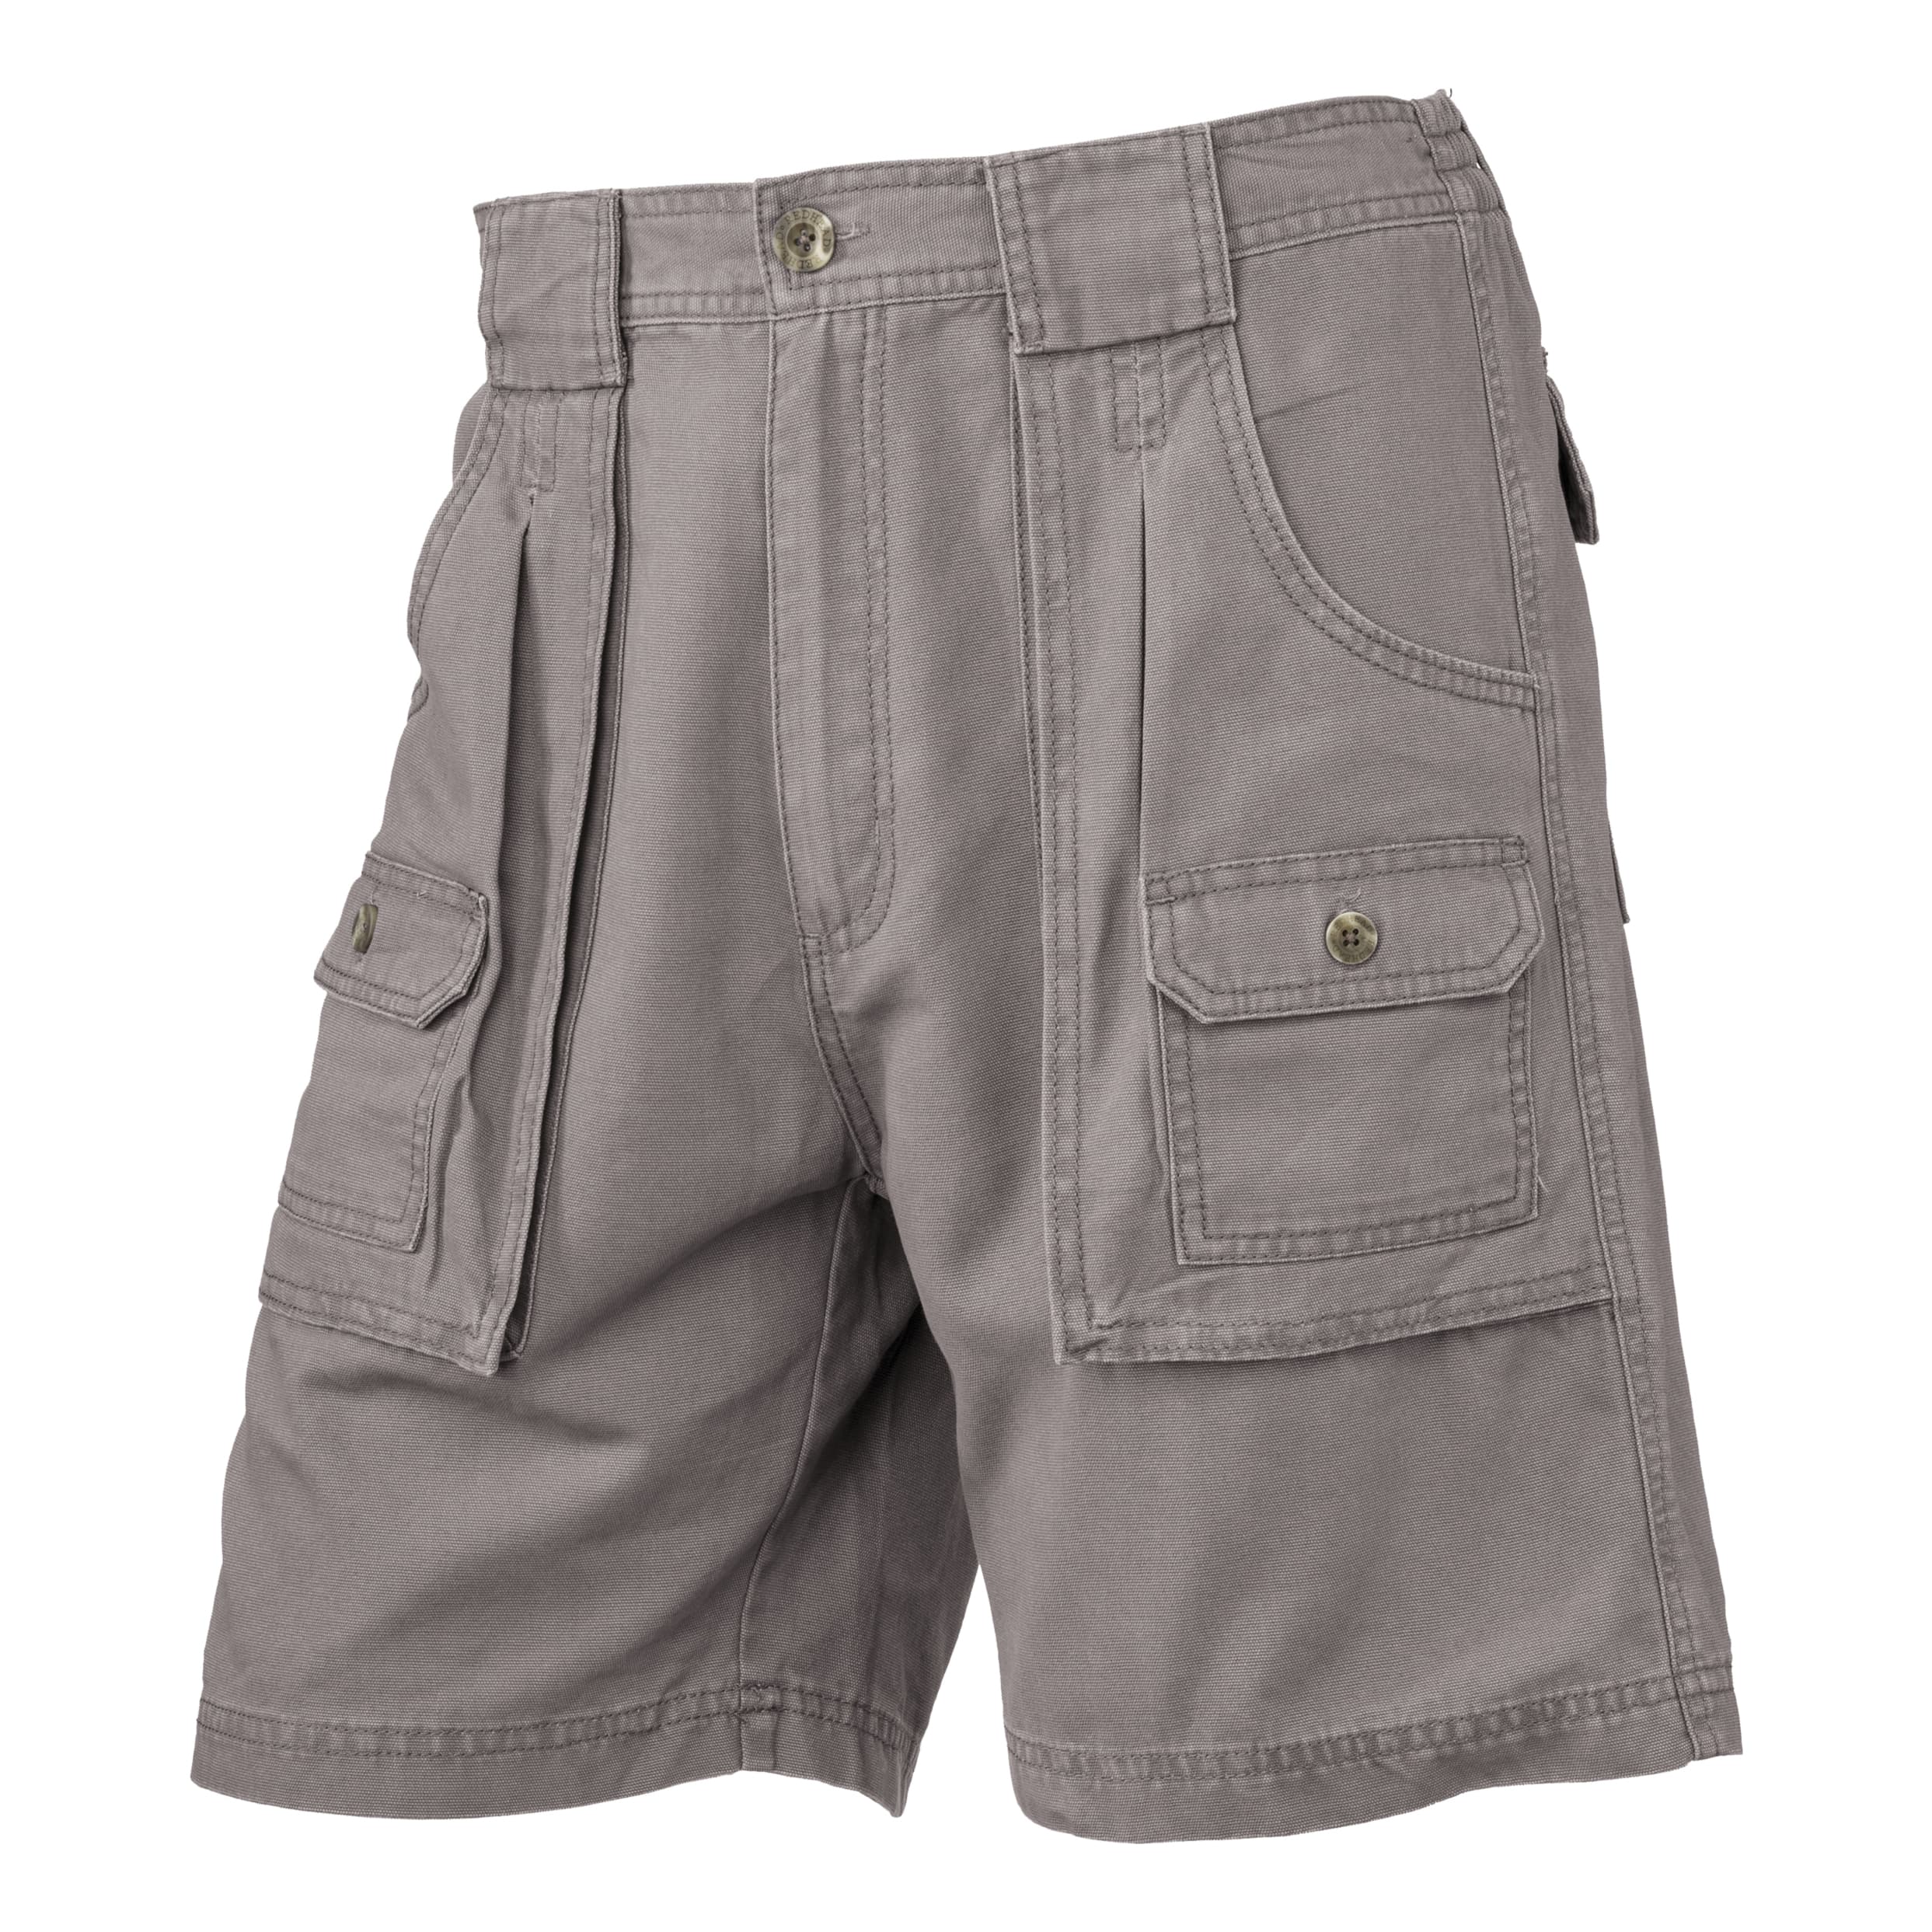 Final Flight Outfitters Inc. Under Armour Ua Fish Hunter Cargo Shorts